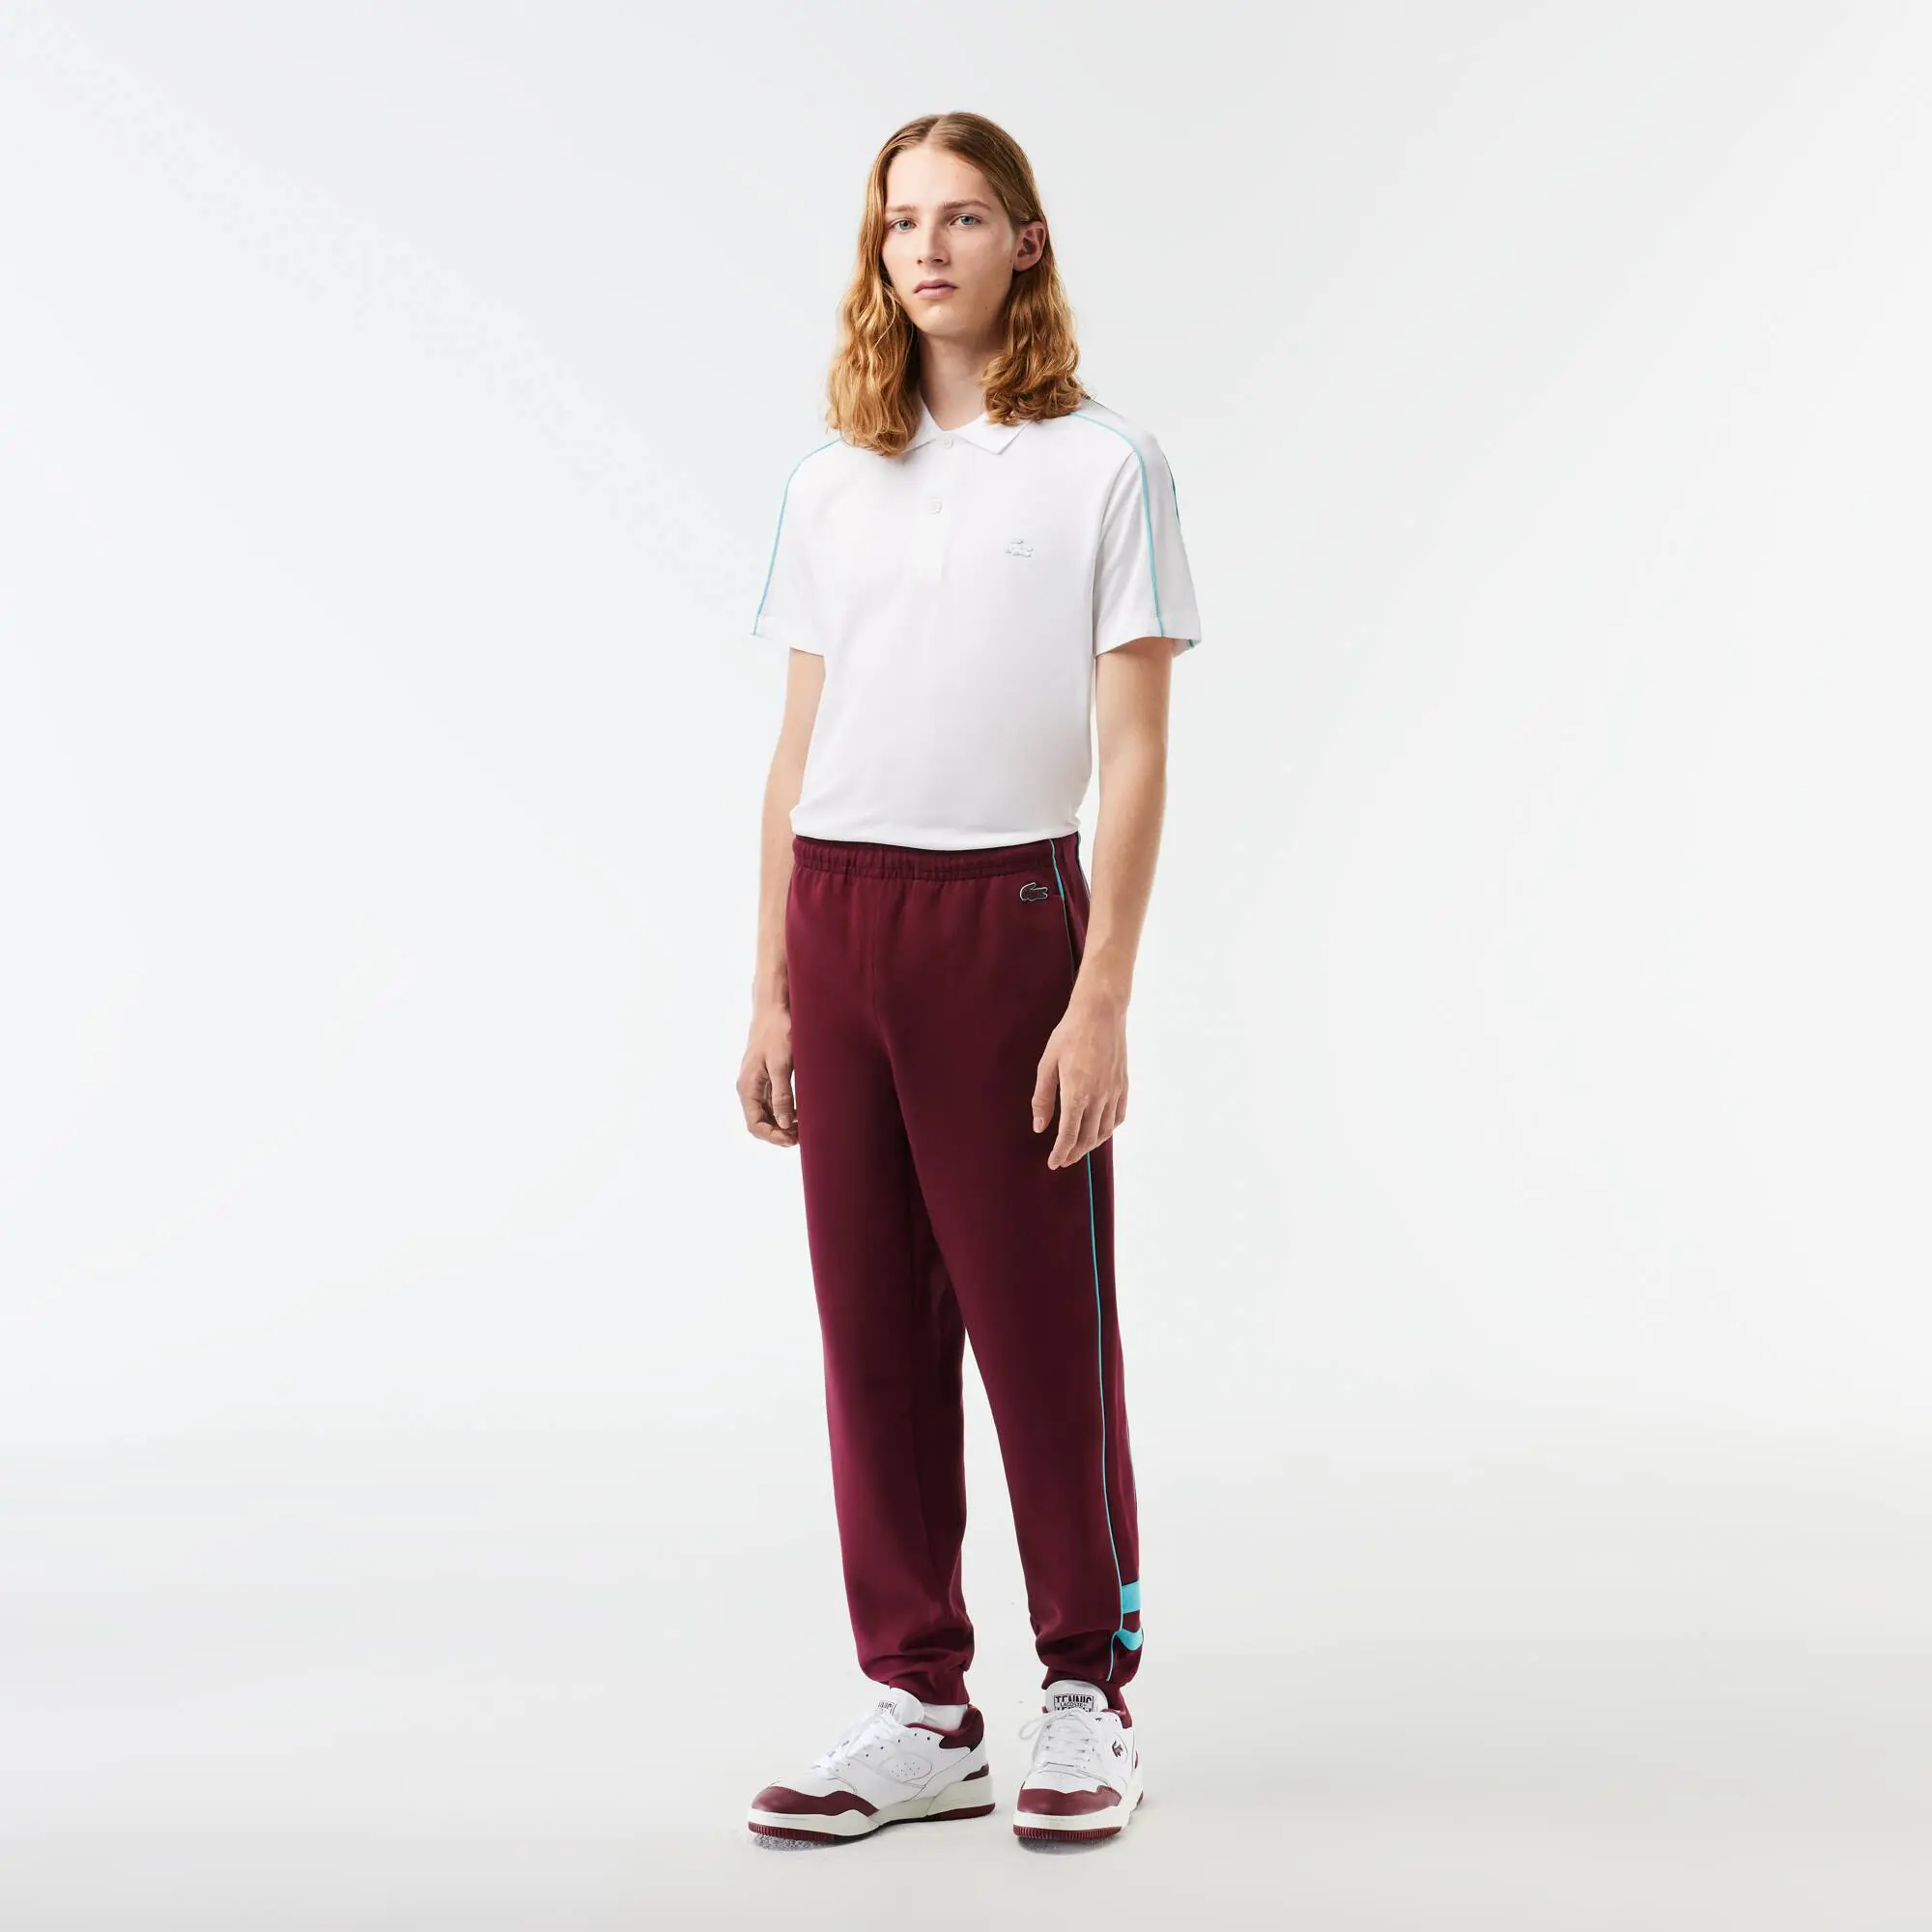 Lacoste Men's Embroidered Sweatpants. 1